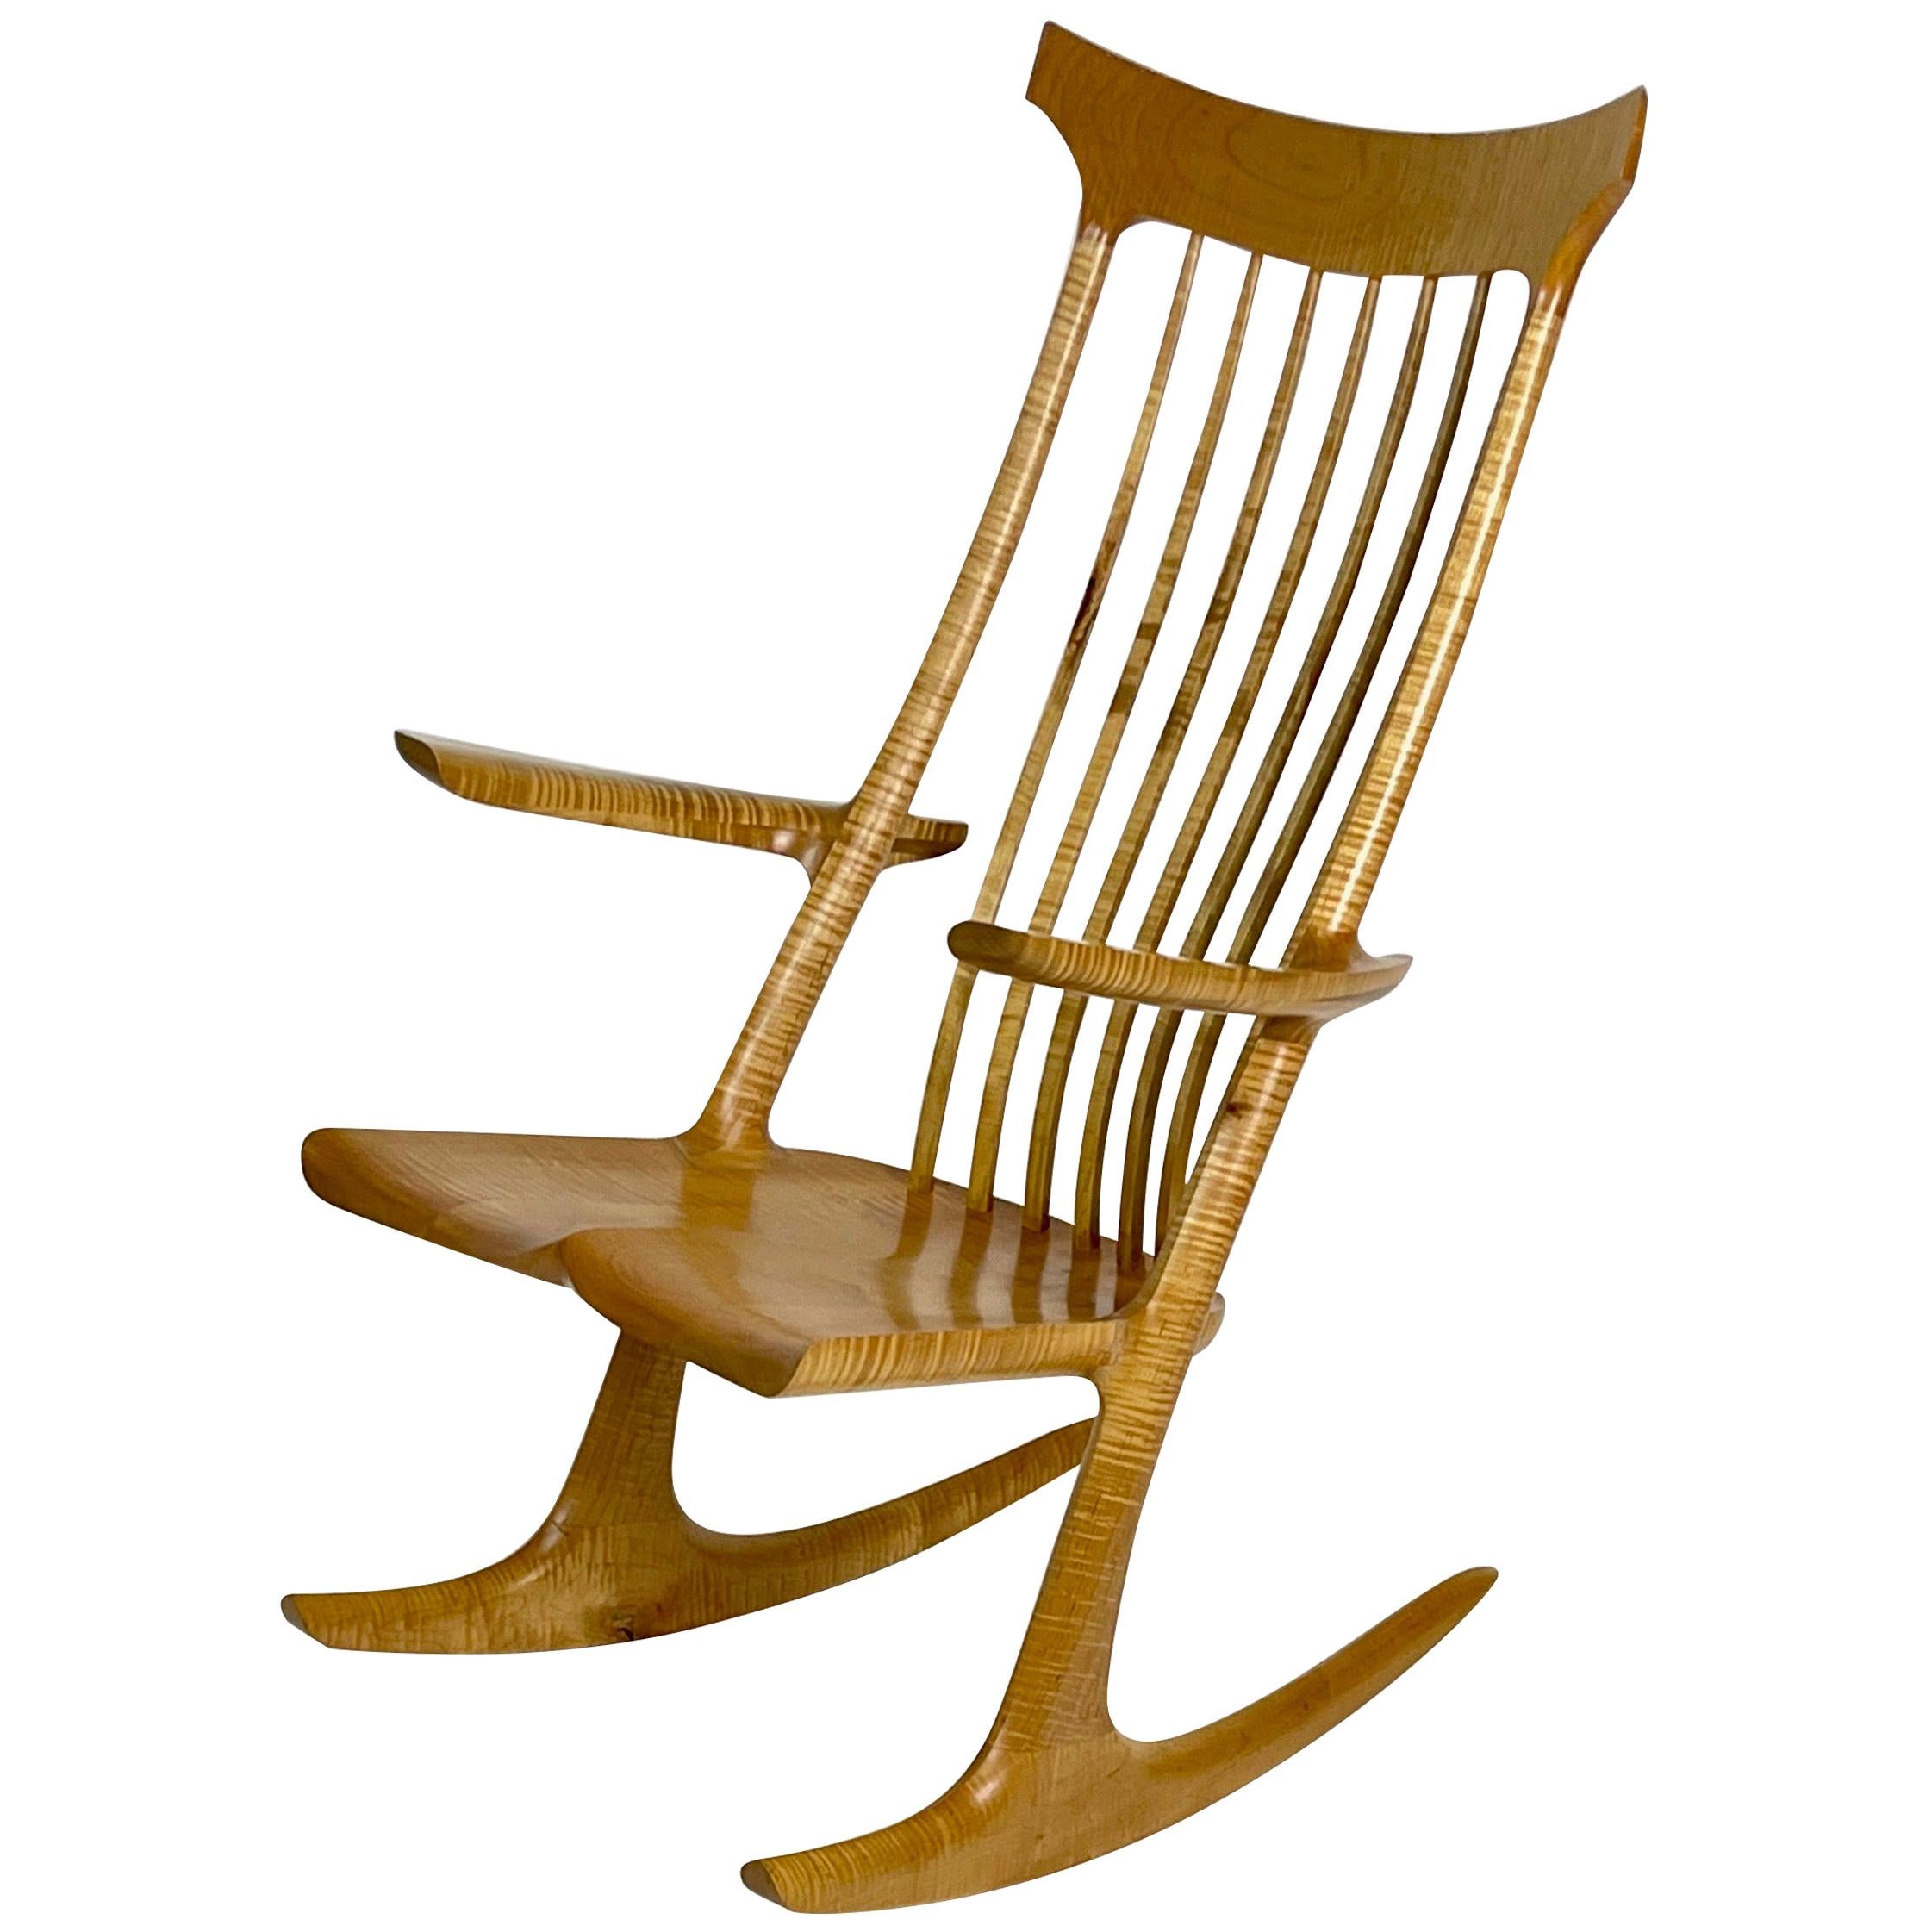 Sculptural Studio Handcrafted Rocker Rocking Chair in Curly Maple